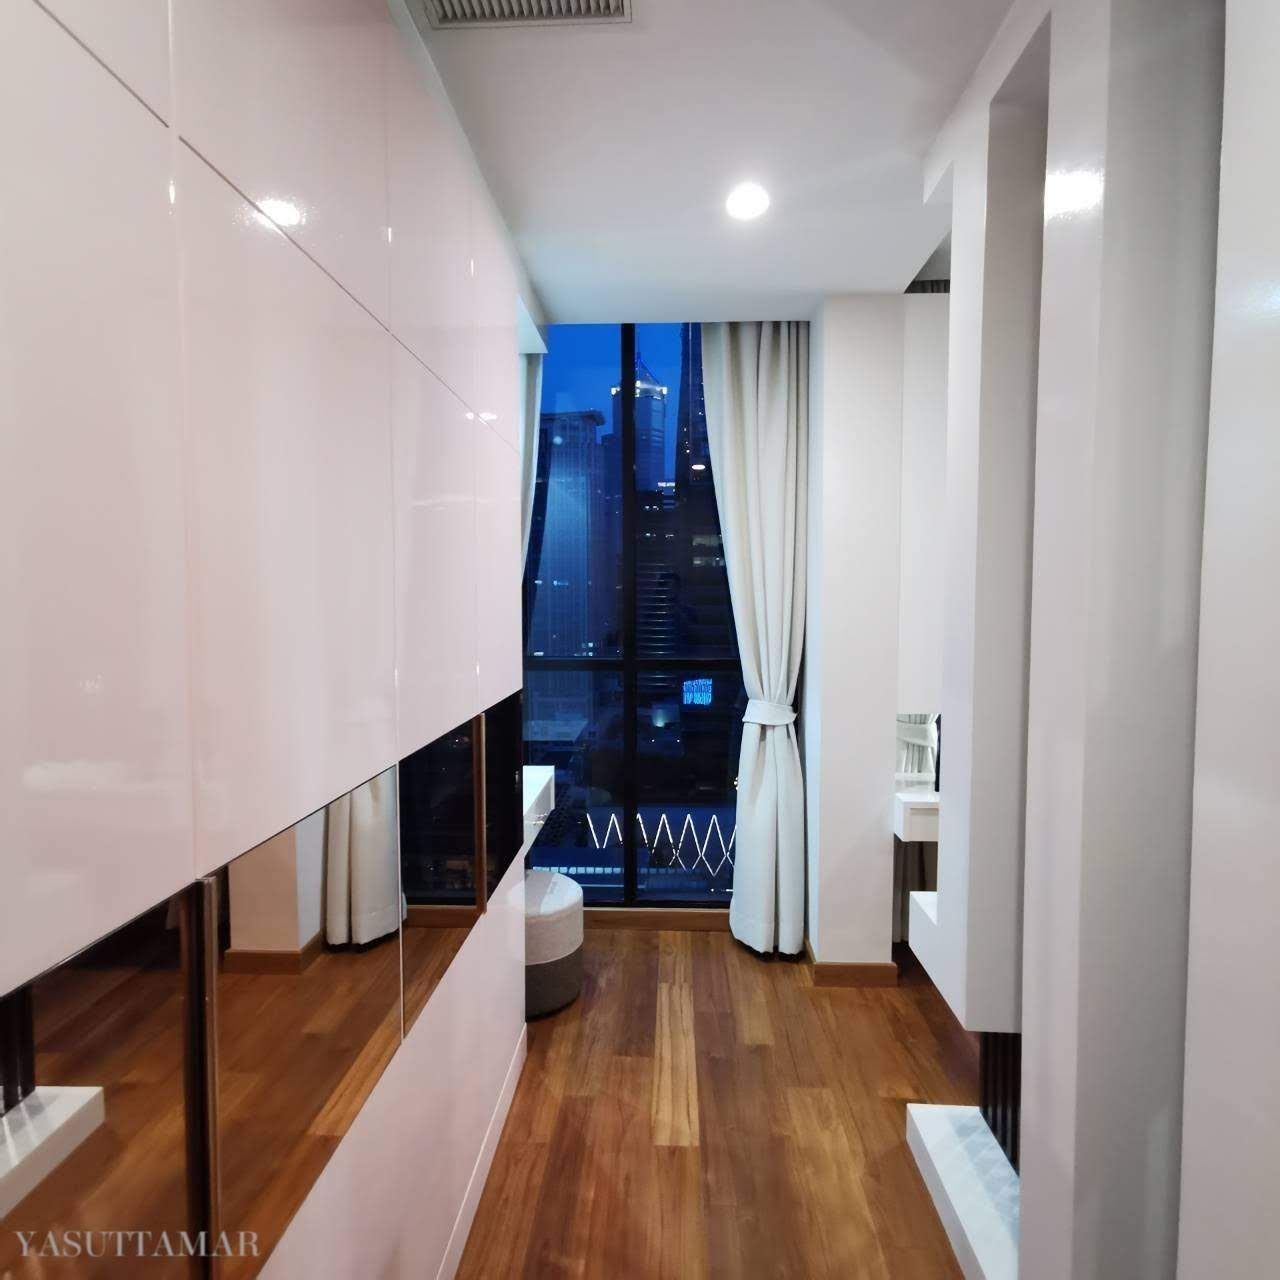 2 Bedroom, 1 Bathroom 70.54sqm size 15th Flr at Noble Ploenchit For Rent 80,000/Month